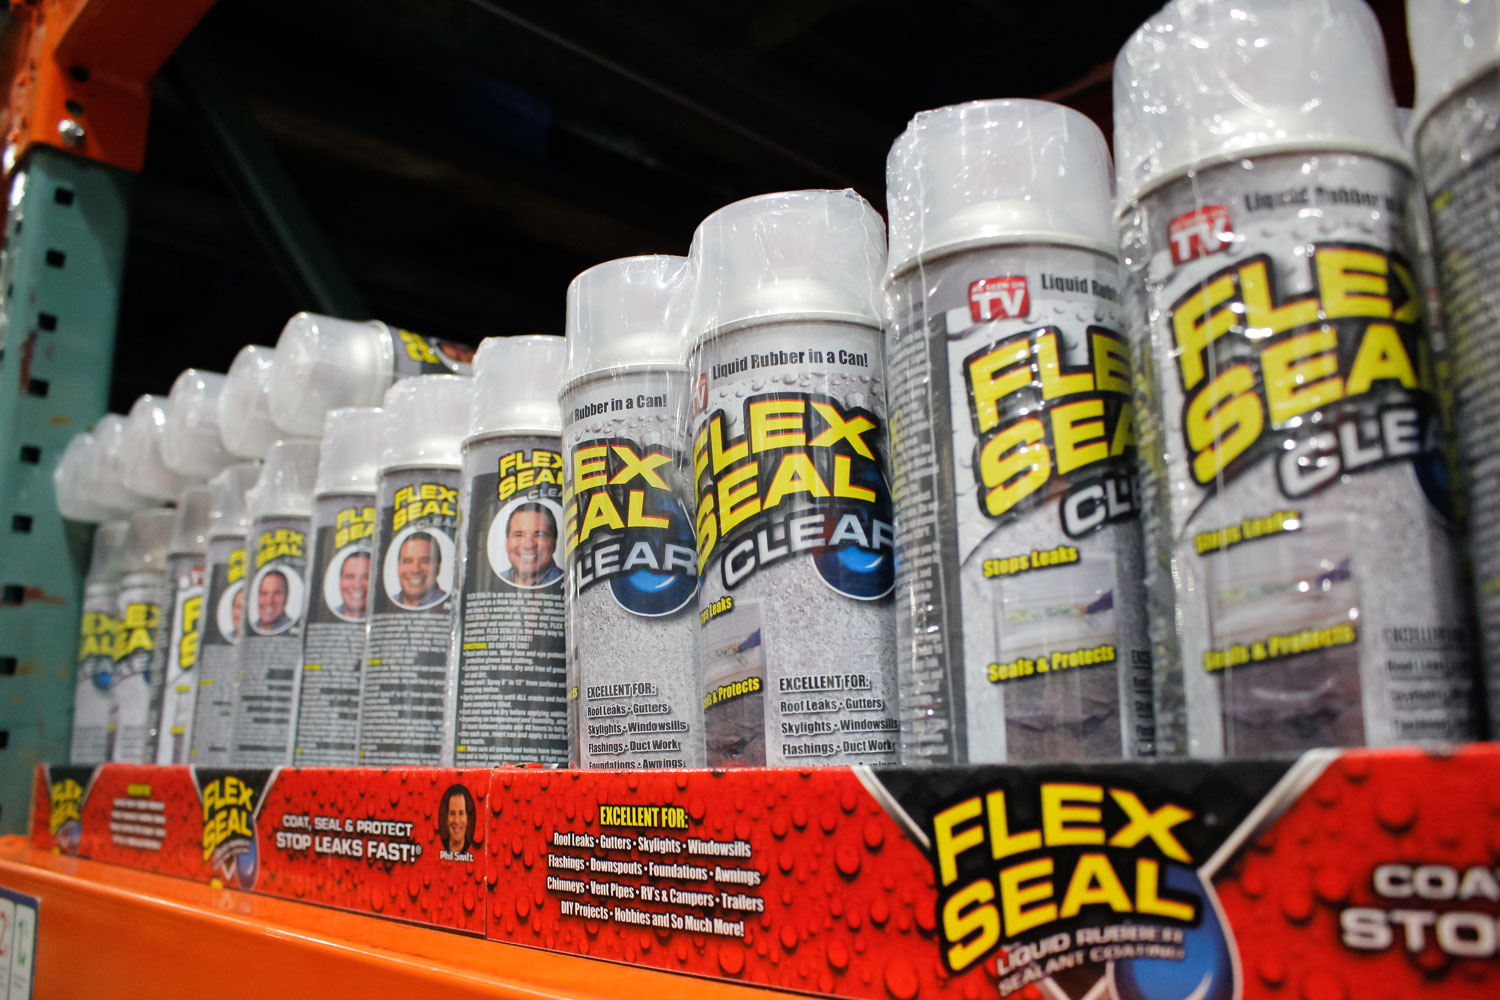 A view of several cans of Flex Seal Clear, on display at a local hardware store.